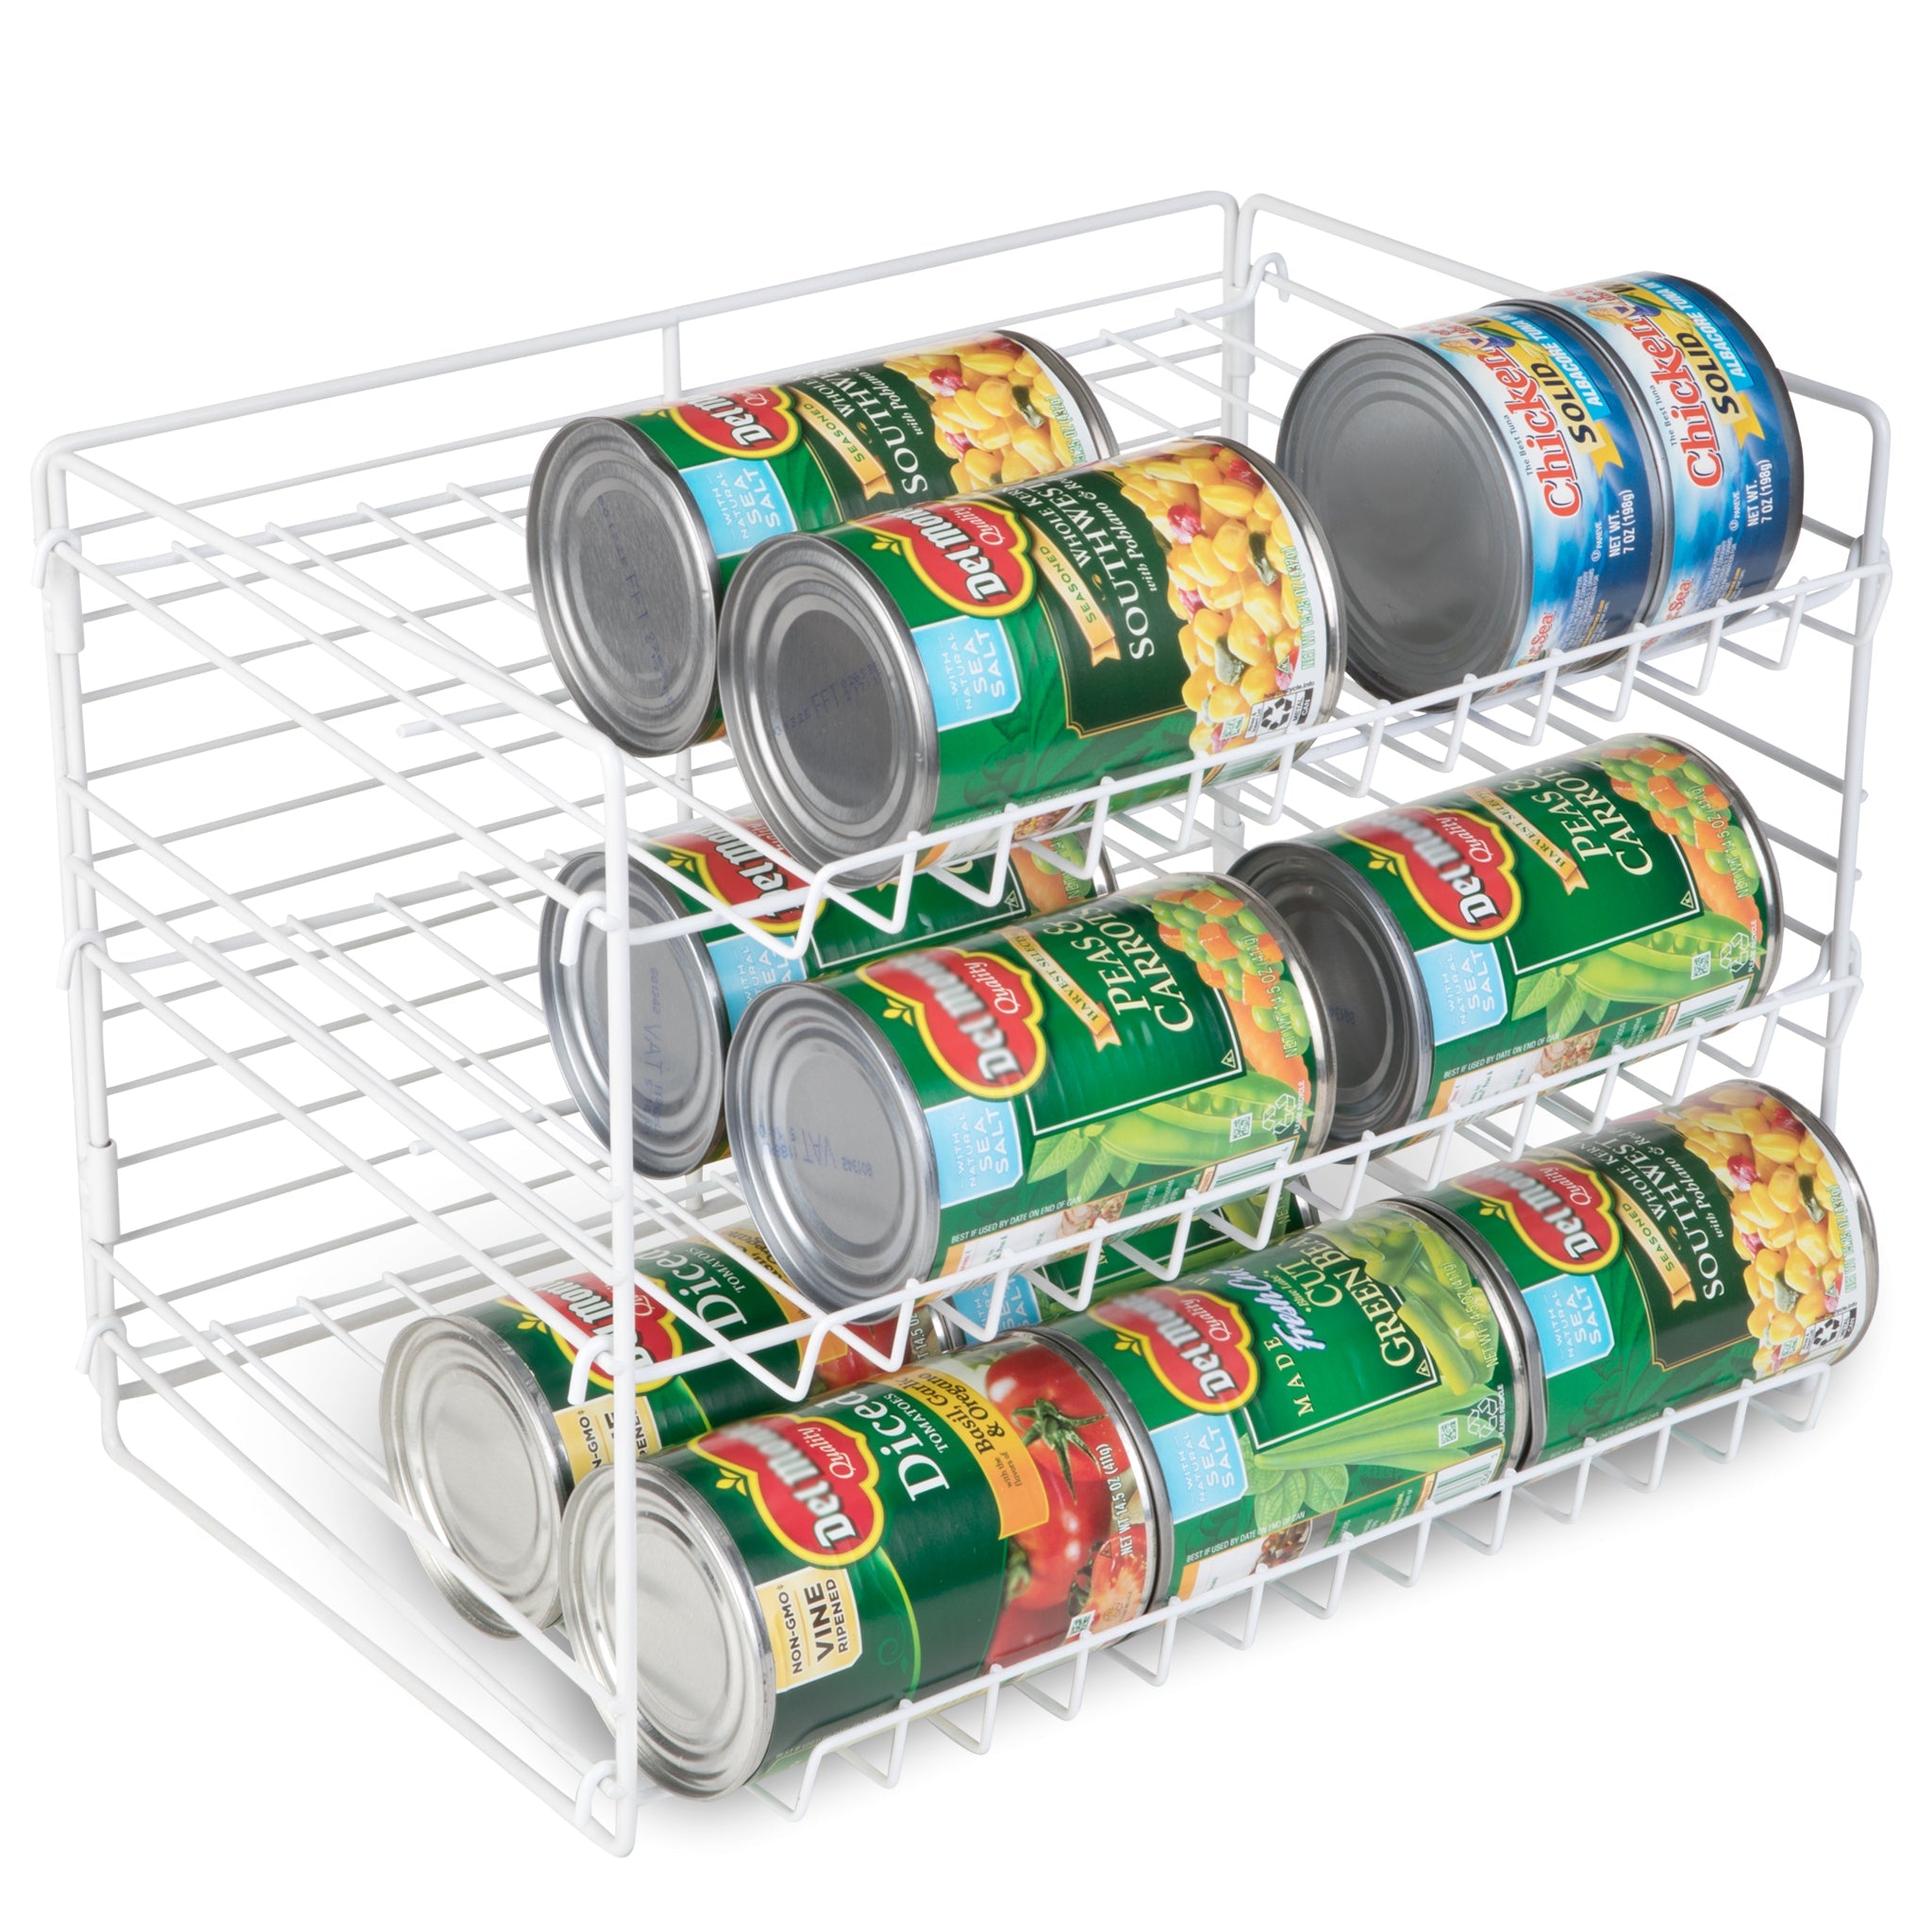 Canned Food Organization Problems Solved With This Pantry Tool